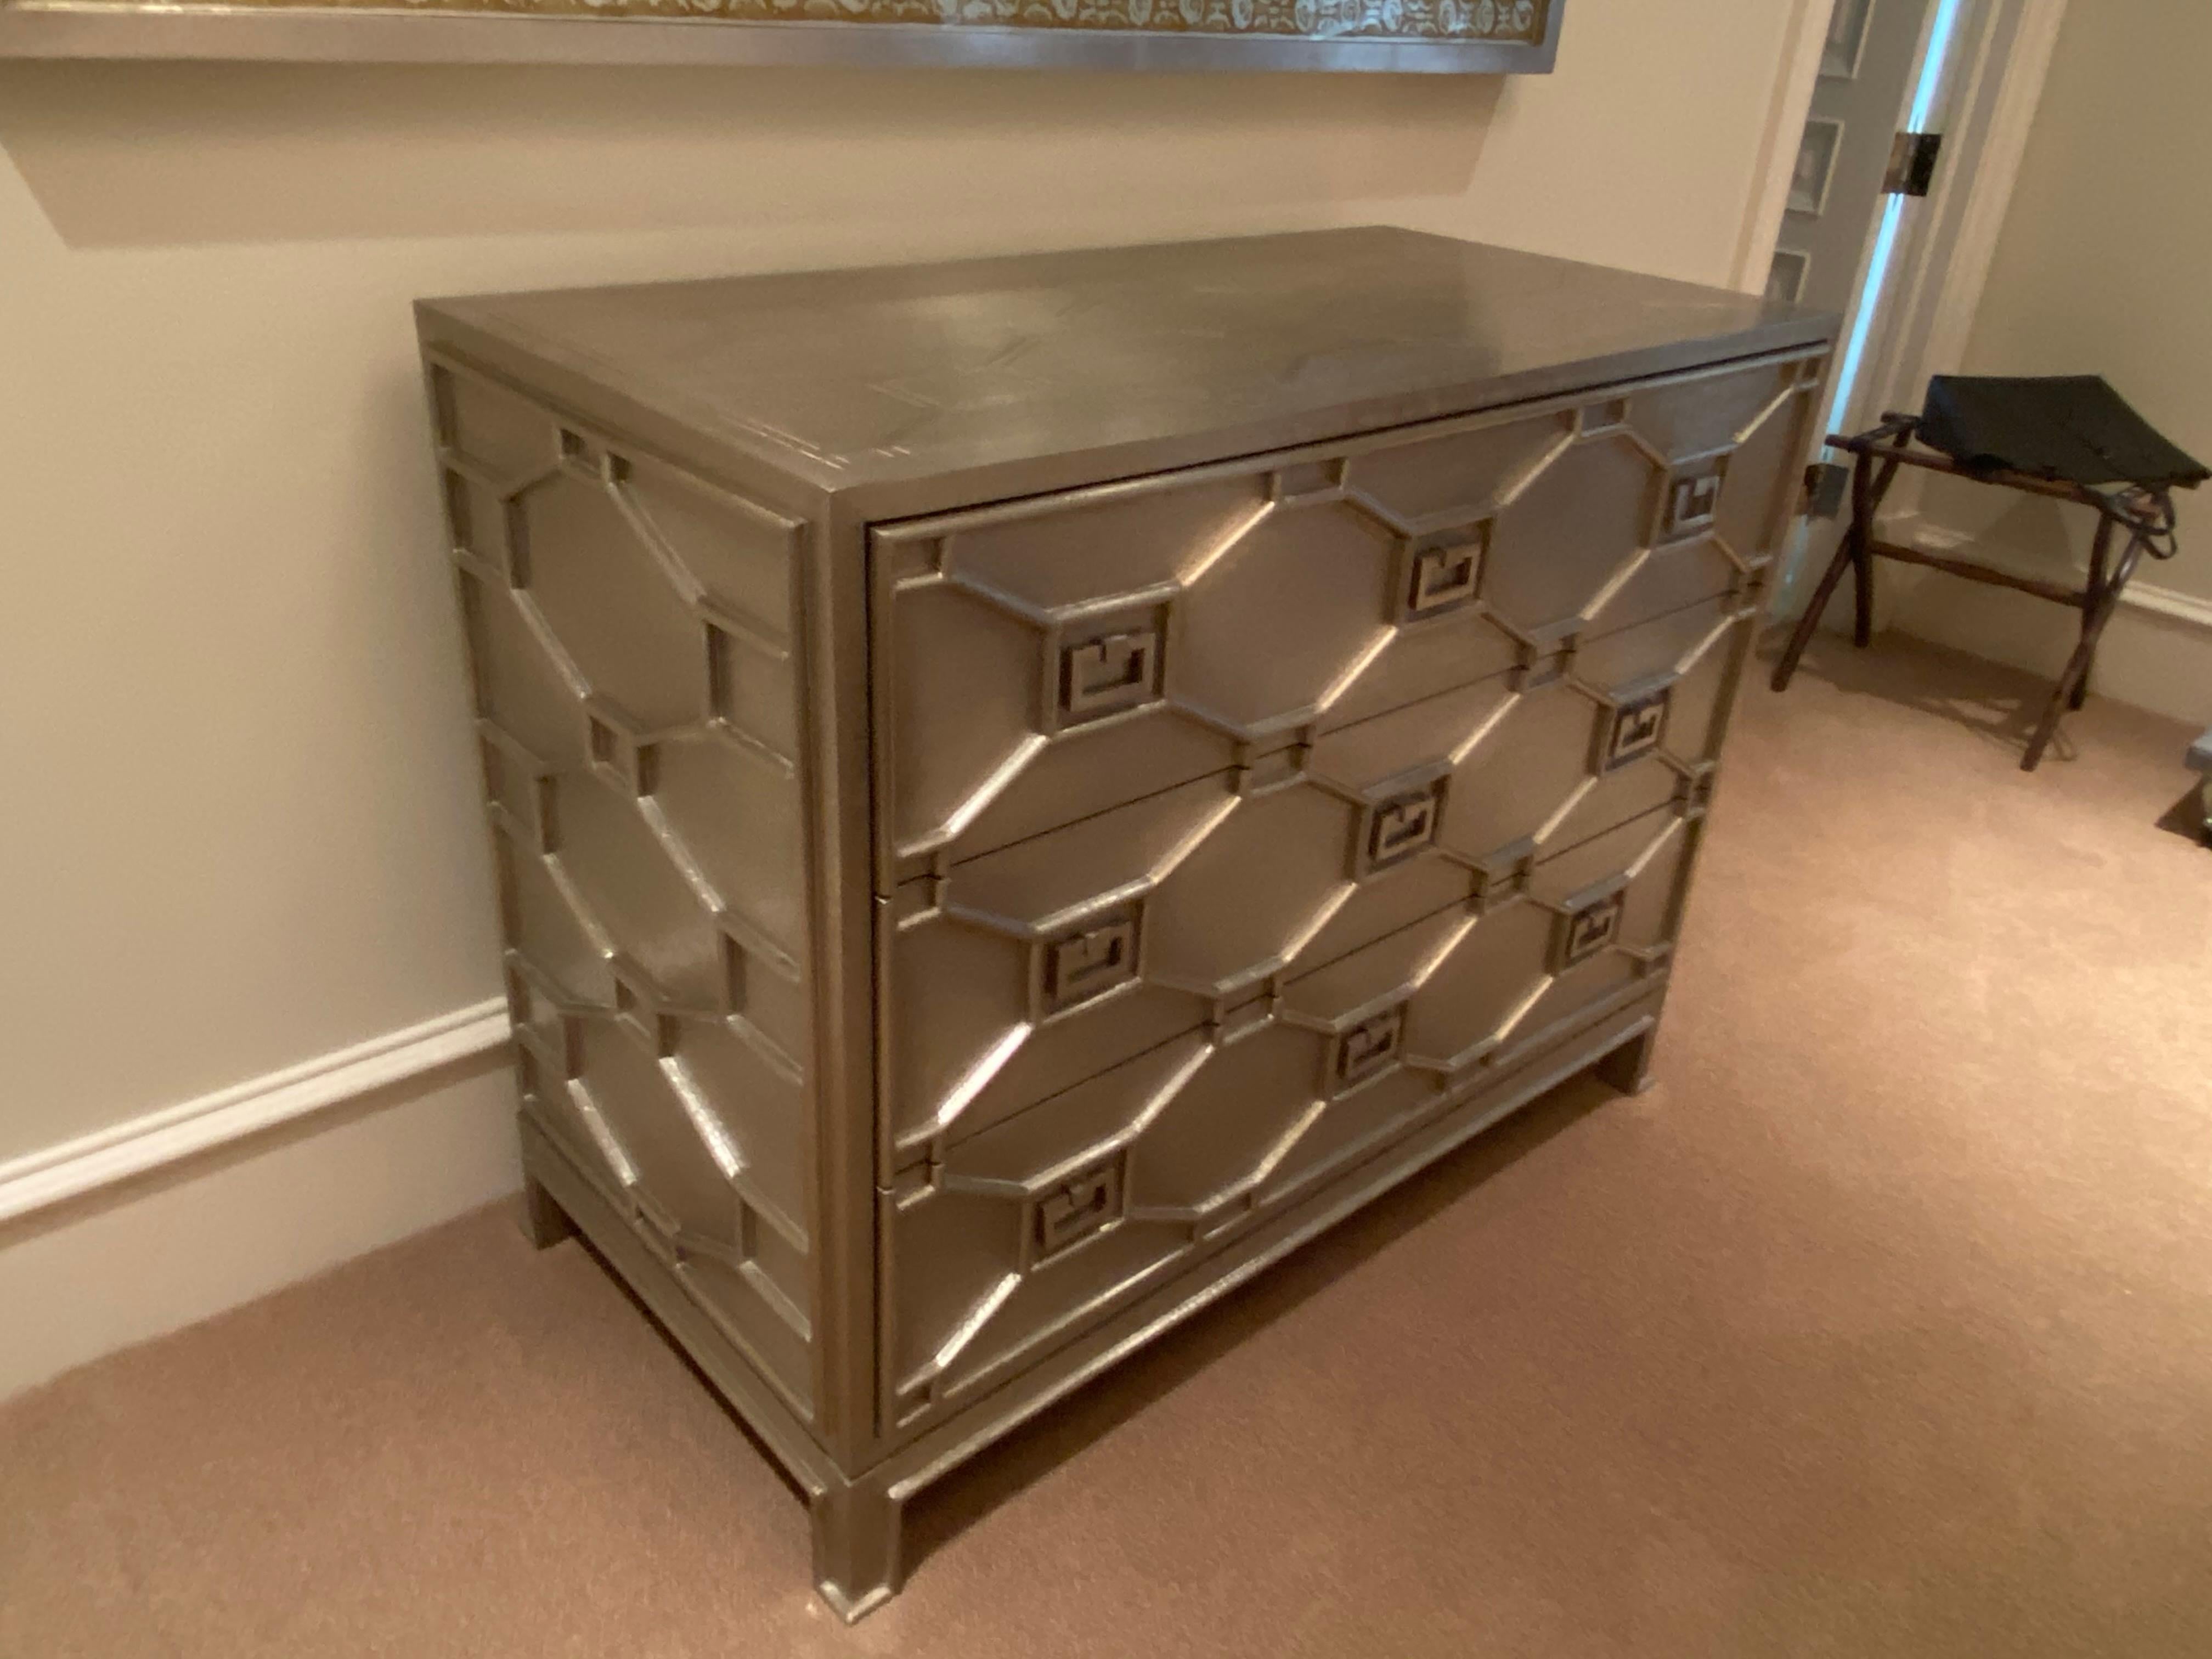 Understated elegance,
The Greenbrier chest is a chest with a three dimensional lattice design.
The oversized chest has three enormous fully lacquered drawers with full extension metal glides making this chest as functional as it is